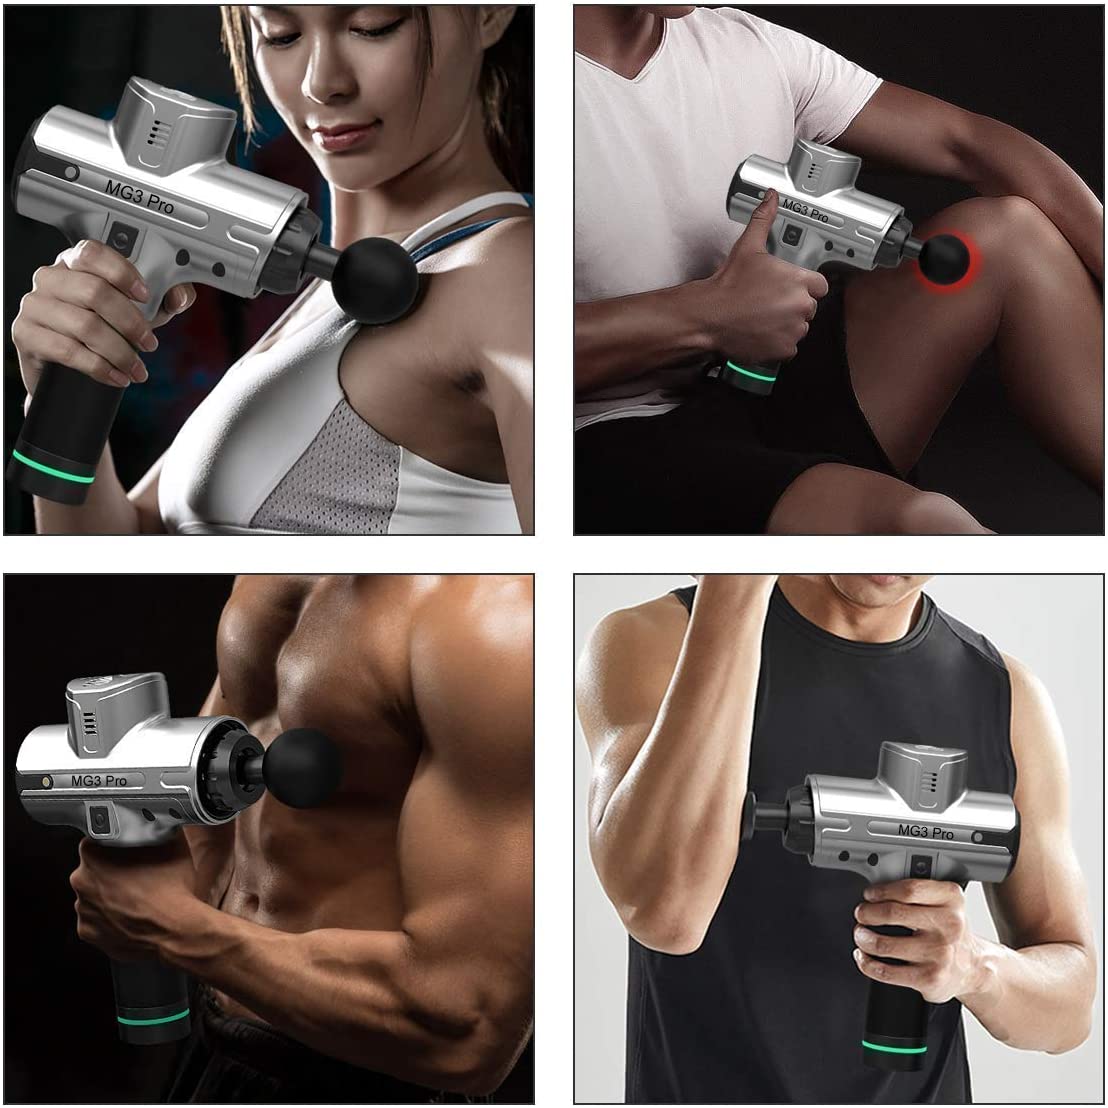 Massage Gun Deep Tissue Percussion Massager, MG3 Upgraded Handheld Sports Drill Quiet Brushless | 9 Speeds, 8 Interchangeable Heads, Long Life Battery 5200mAh | Helps Relieve Sore Muscle & Stiffness